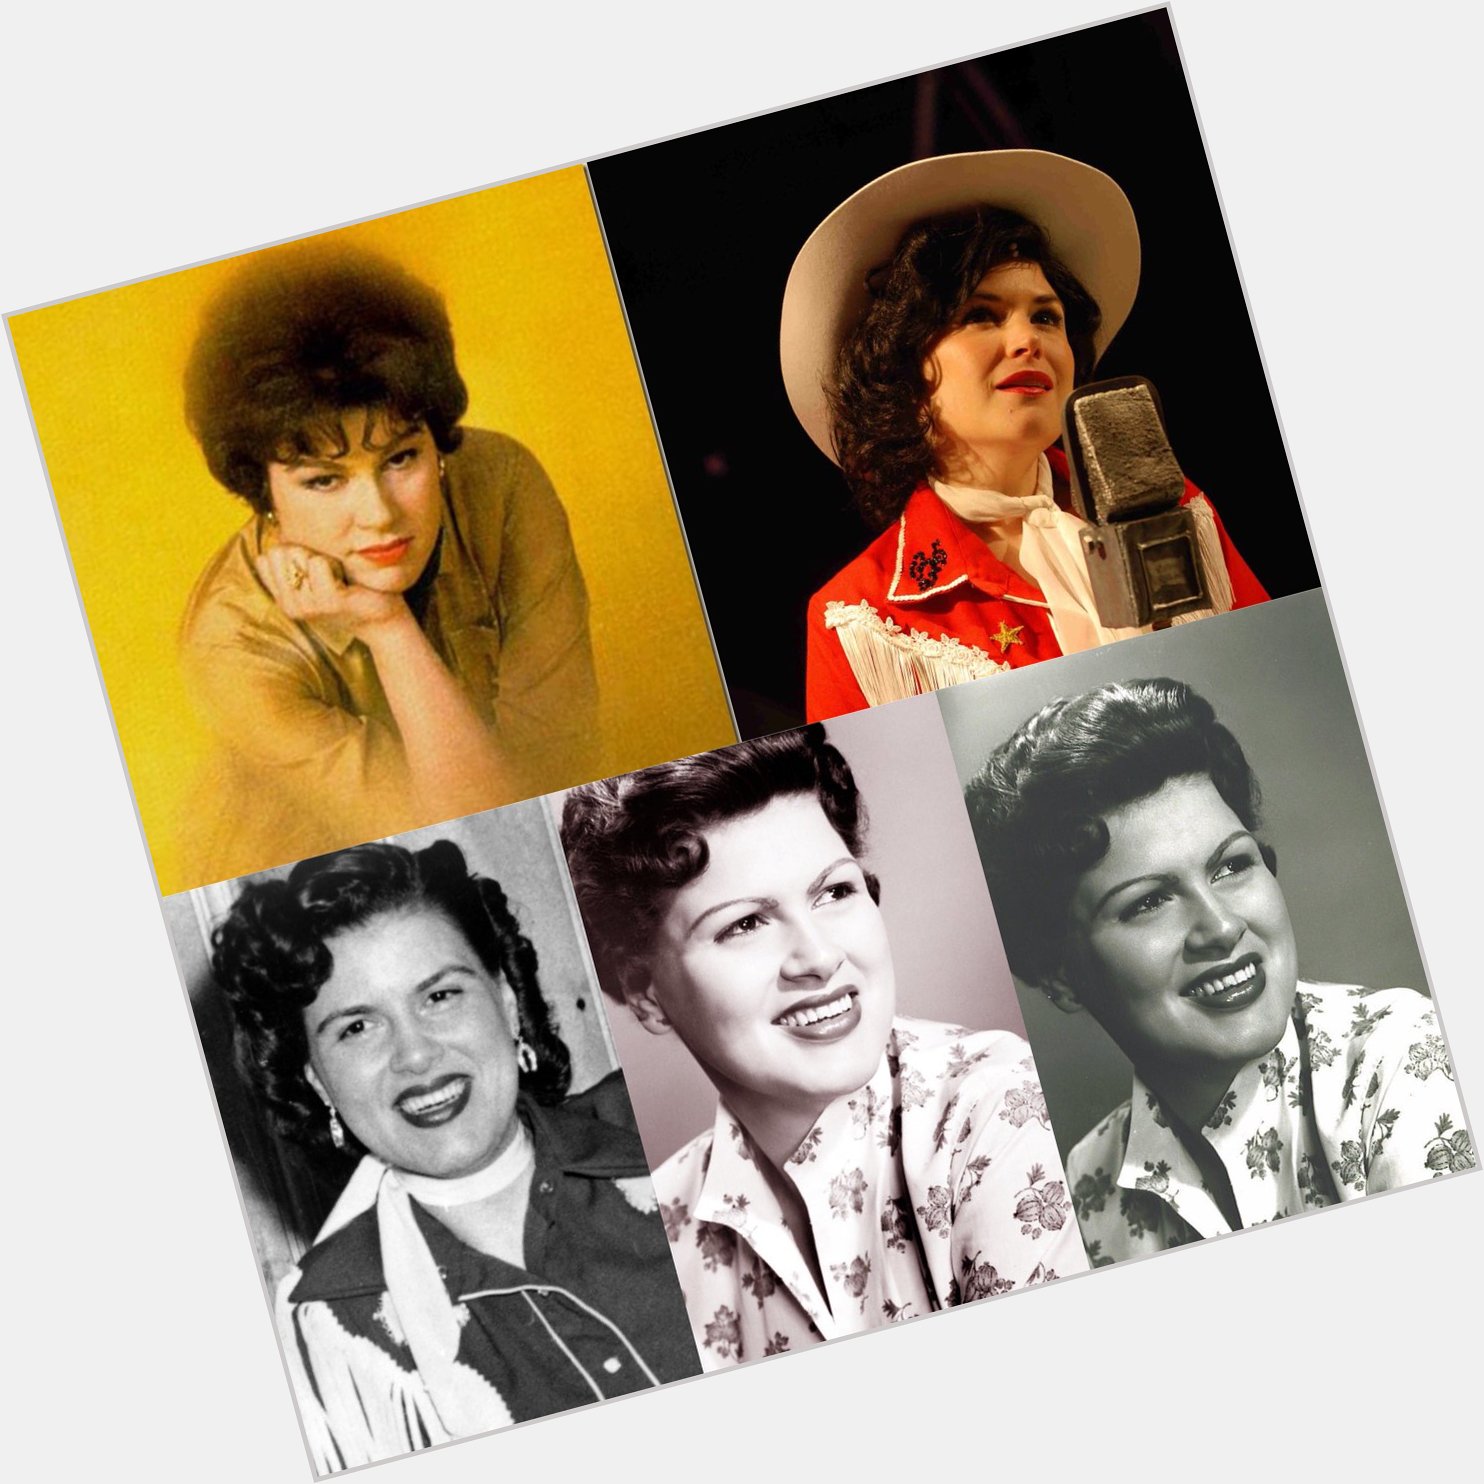 Happy 86 birthday to Patsy Cline up in heaven. May she Rest In Peace.  